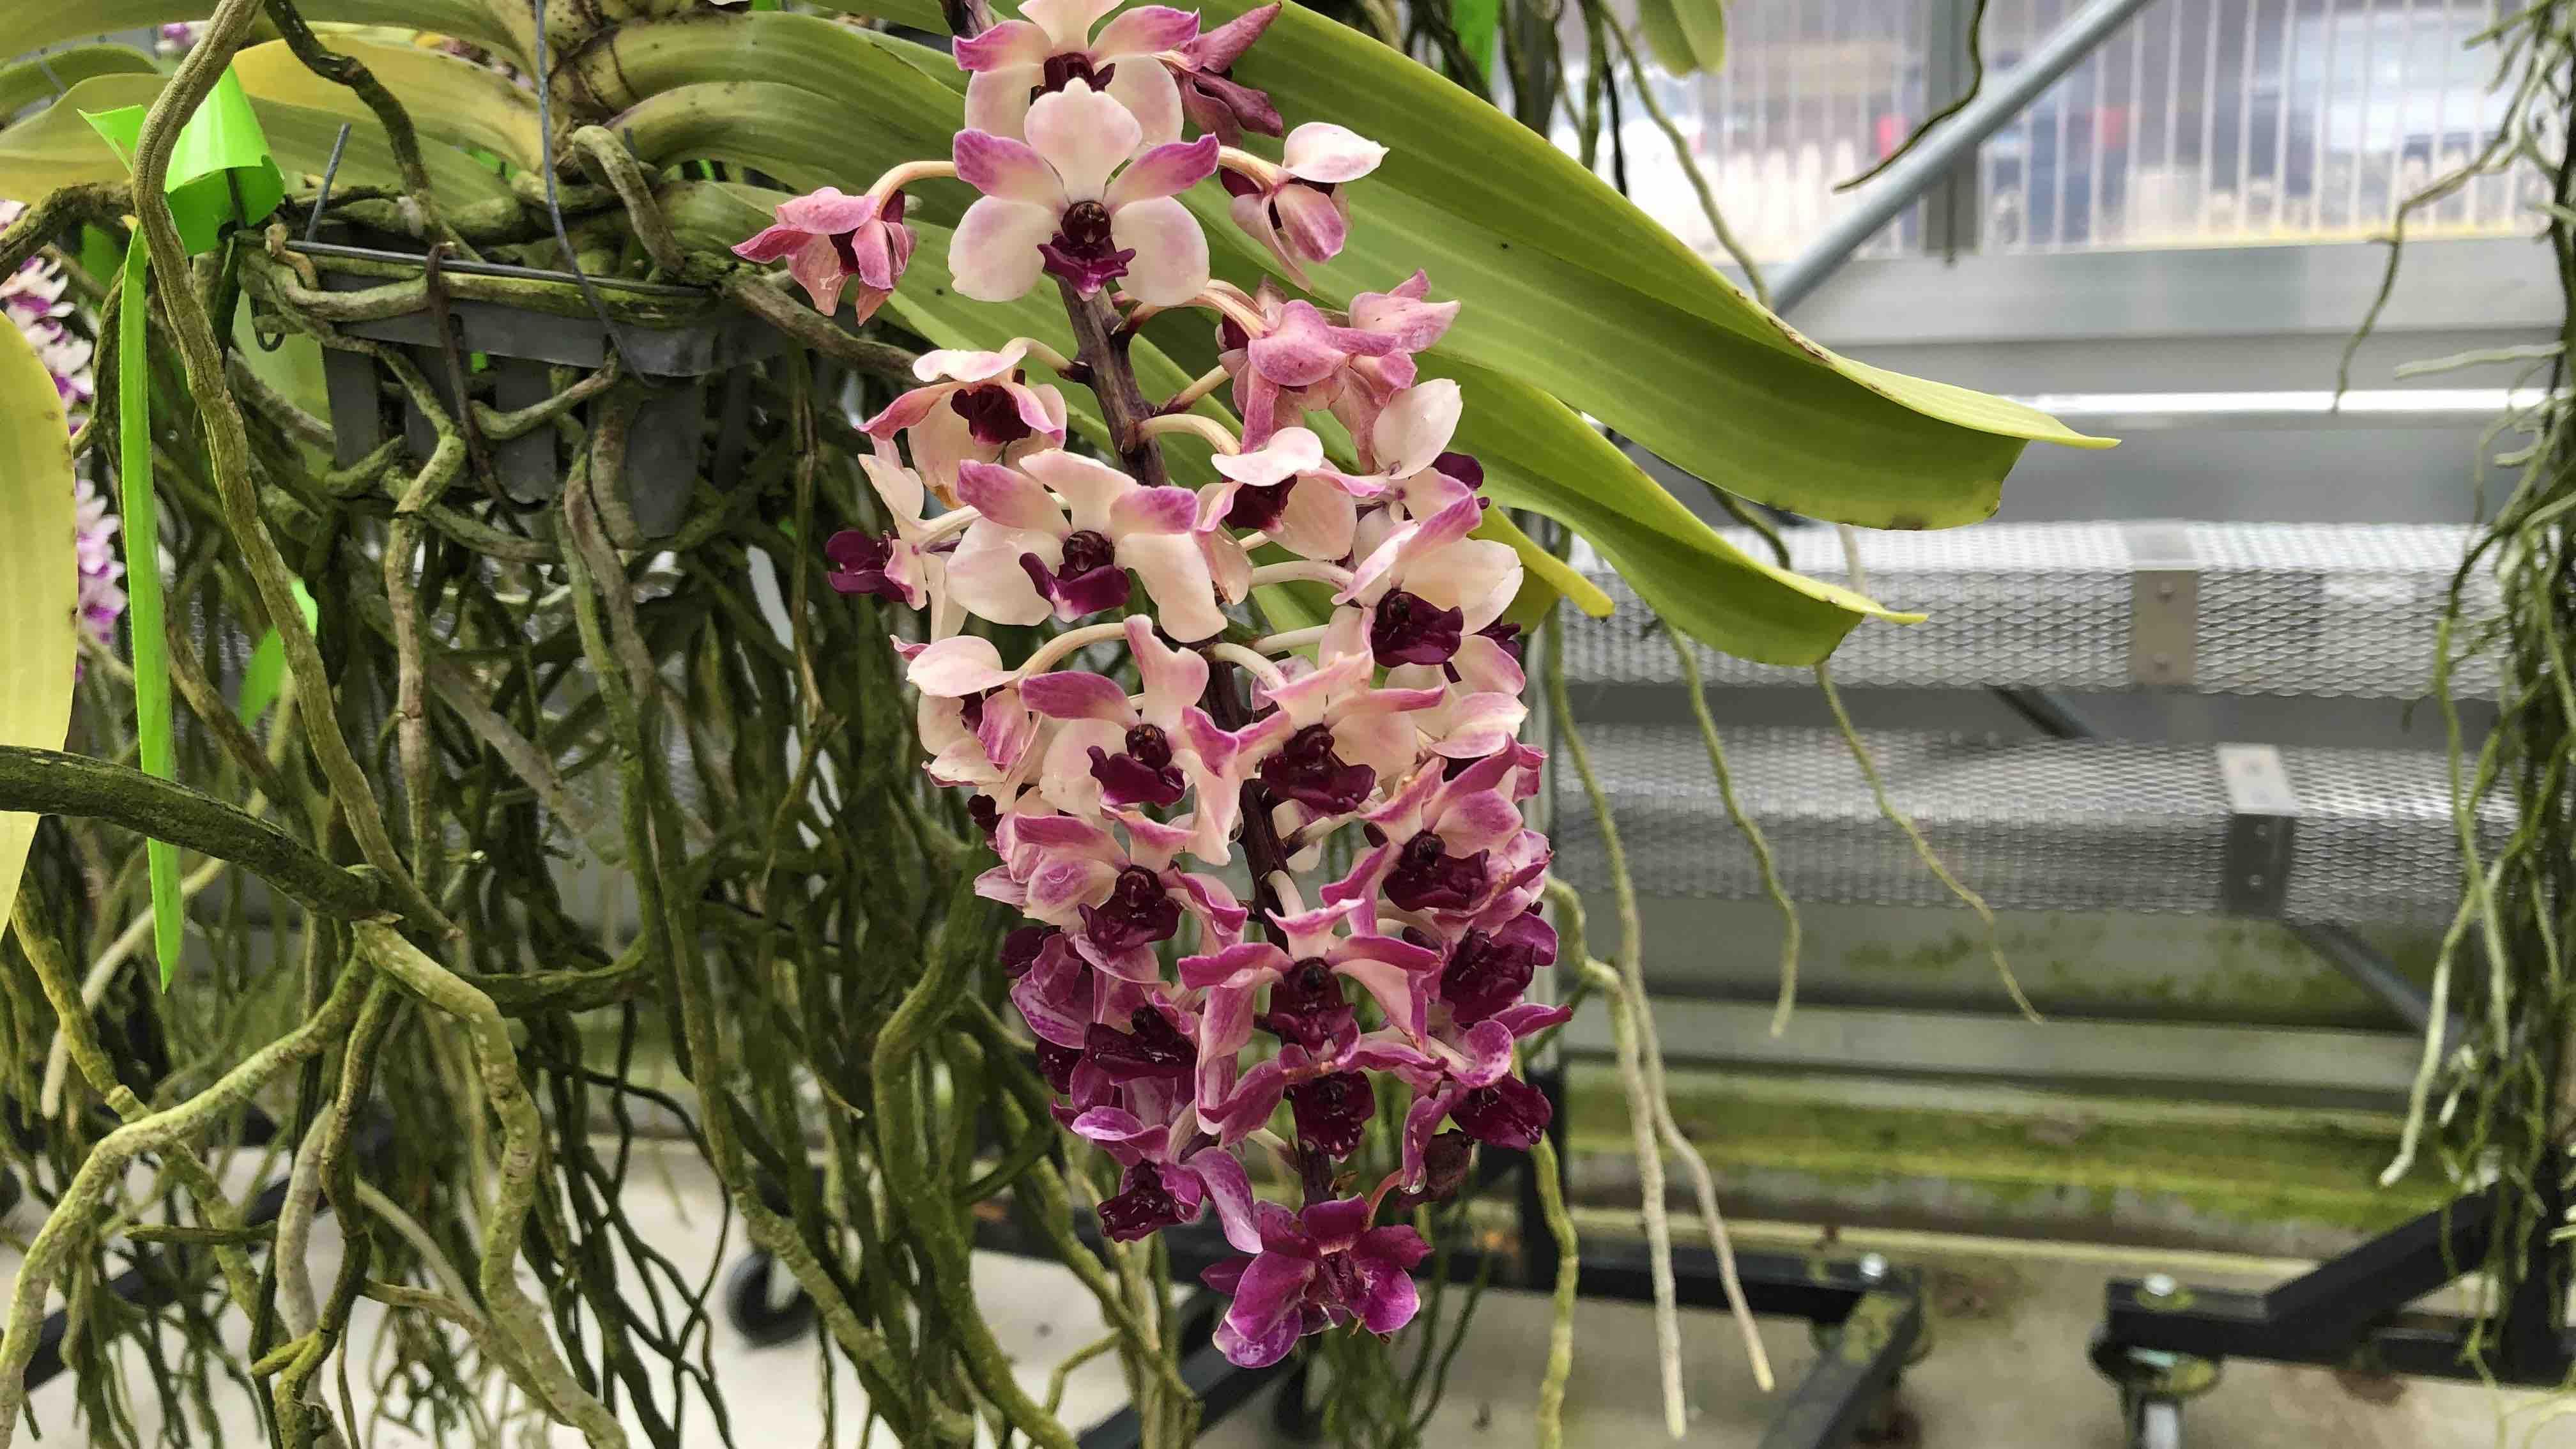 One of the 700 species of orchids in the Chicago Botanic Garden's collection, housed in the Orchidarium. (Patty Wetli / WTTW News)